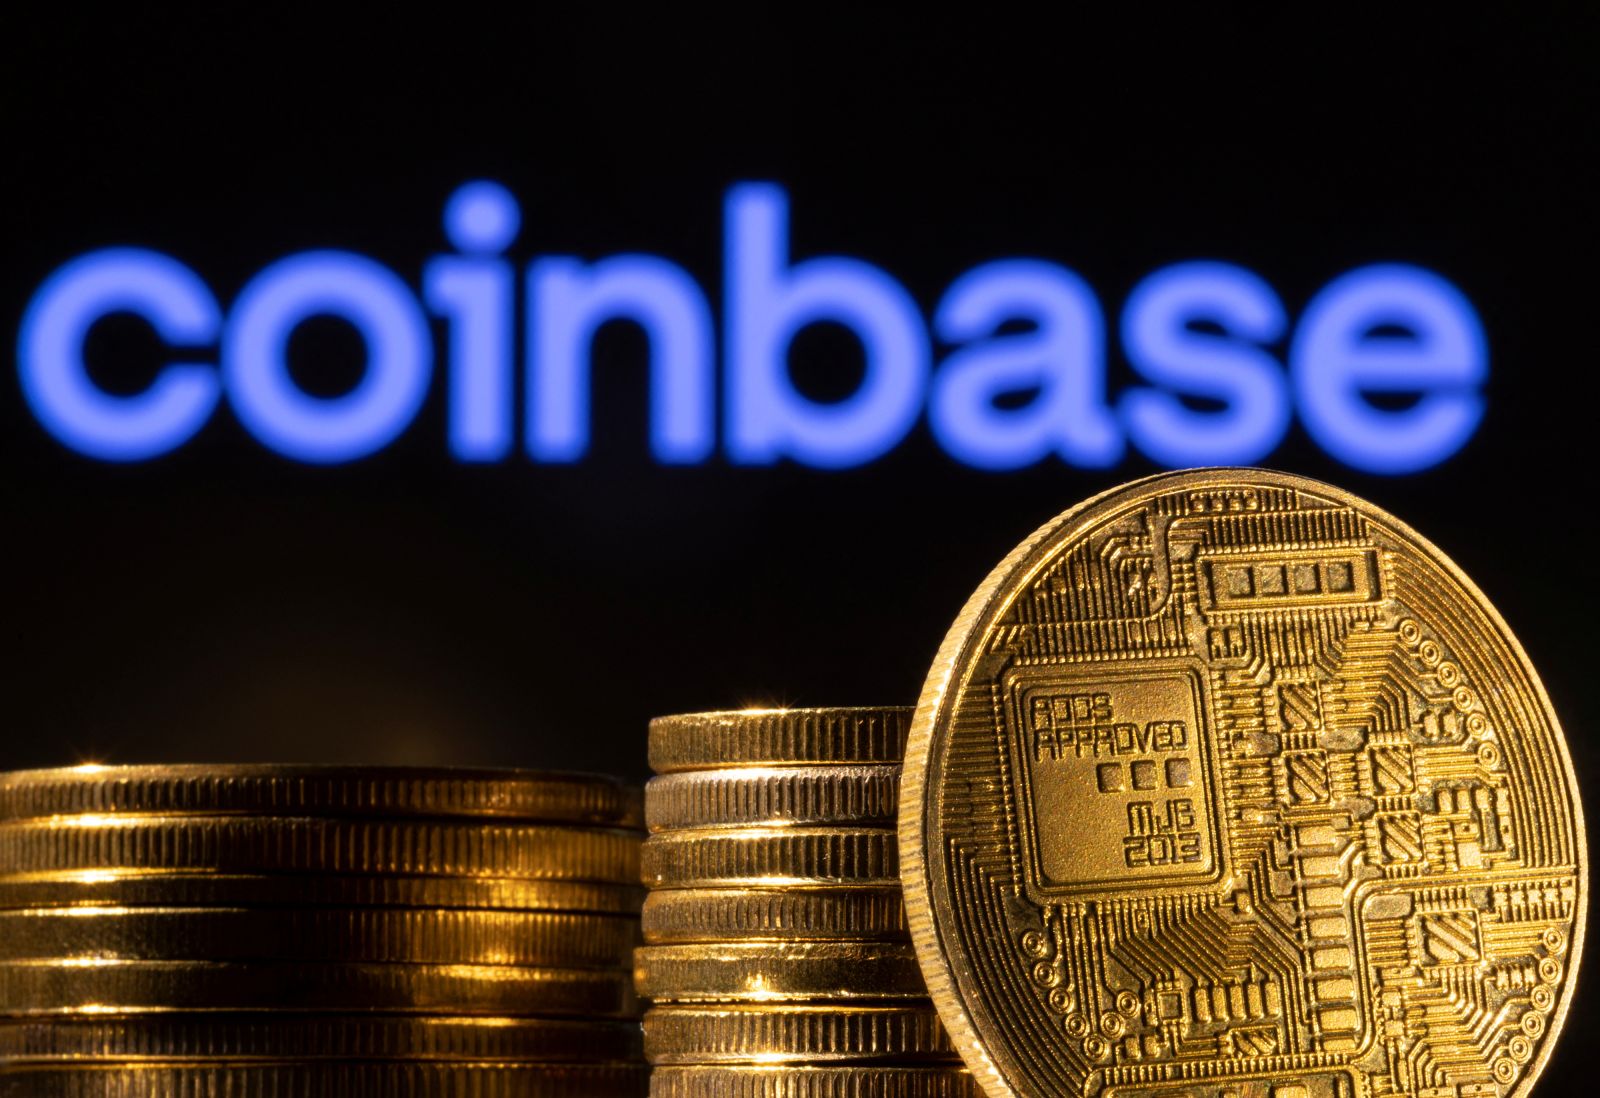 Coinbase Conforms To Sanctions, Blocks 25,000 ‘Illicit’ Russian Crypto Wallet Addresses